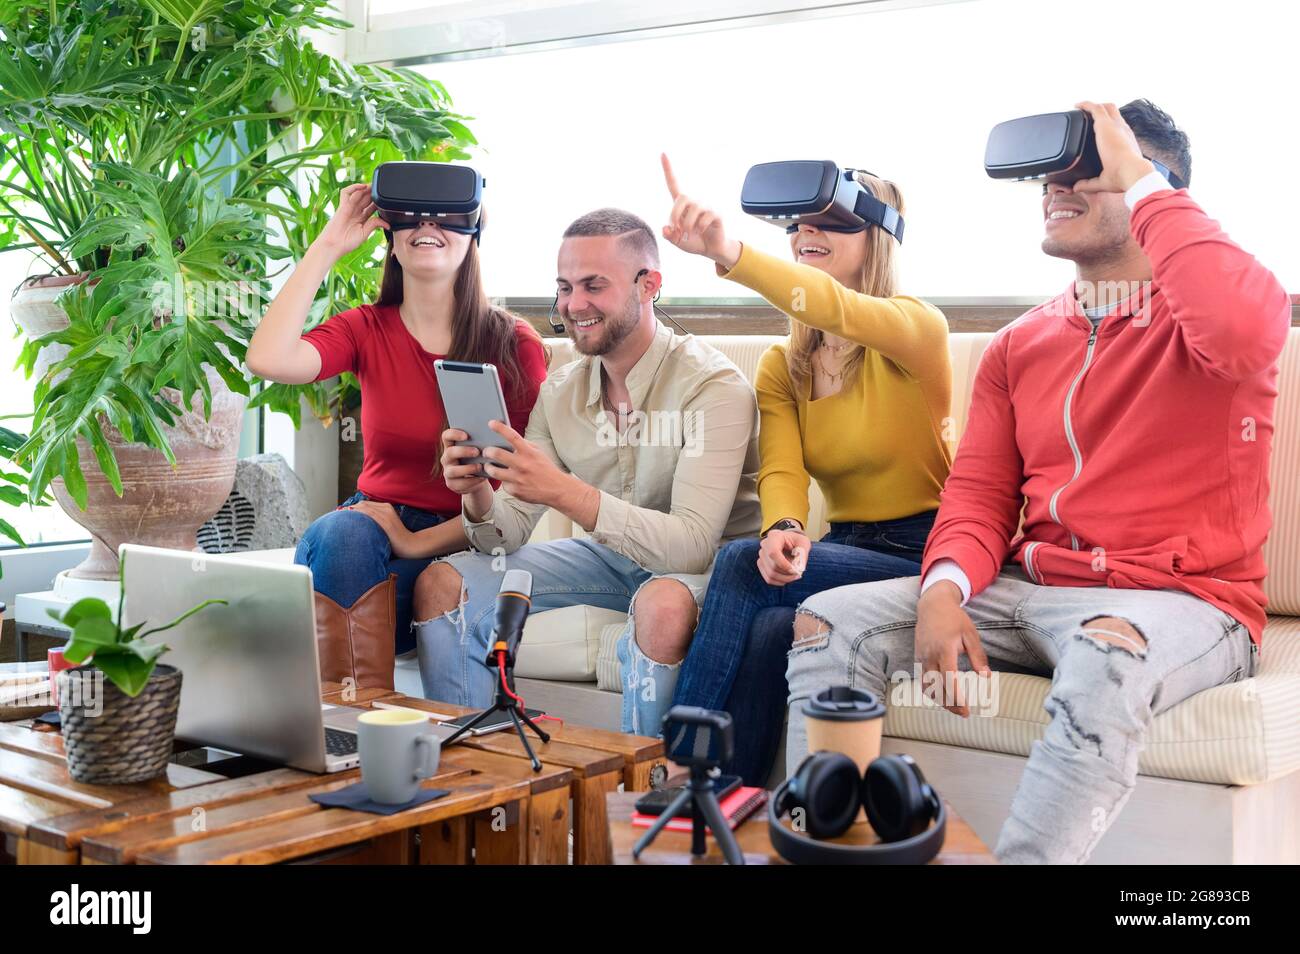 Young people employee workers having fun with vr wearing augmented reality headsets in startup office - High tech office professional people use virtu Stock Photo